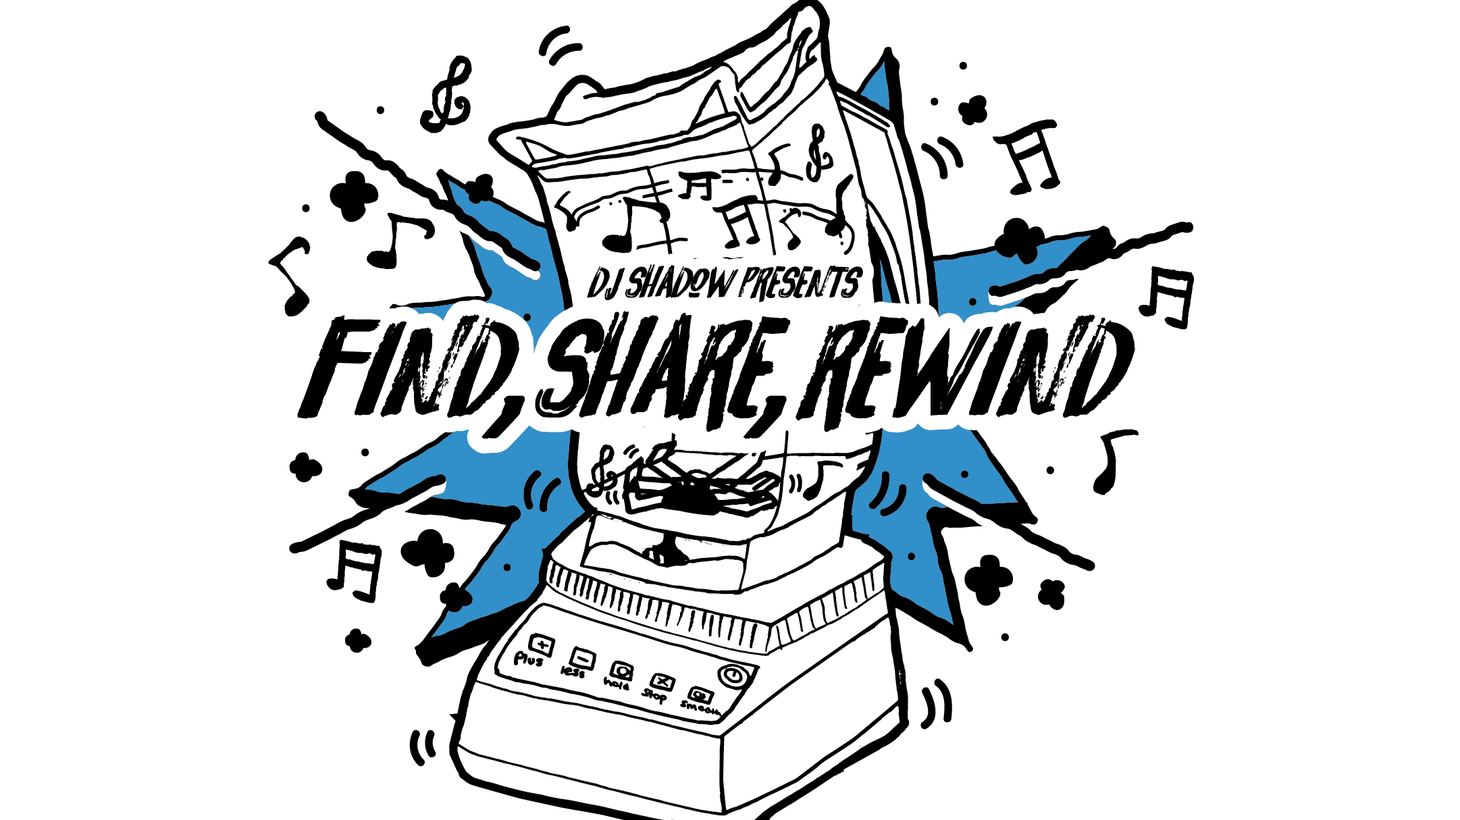 Bay Area groundbreaker DJ Shadow brings his innovative style to an exclusive monthly music residency on KCRW. In Find, Share, Rewind;   Shadow guides listeners through decades of genre-bending musical evolution.